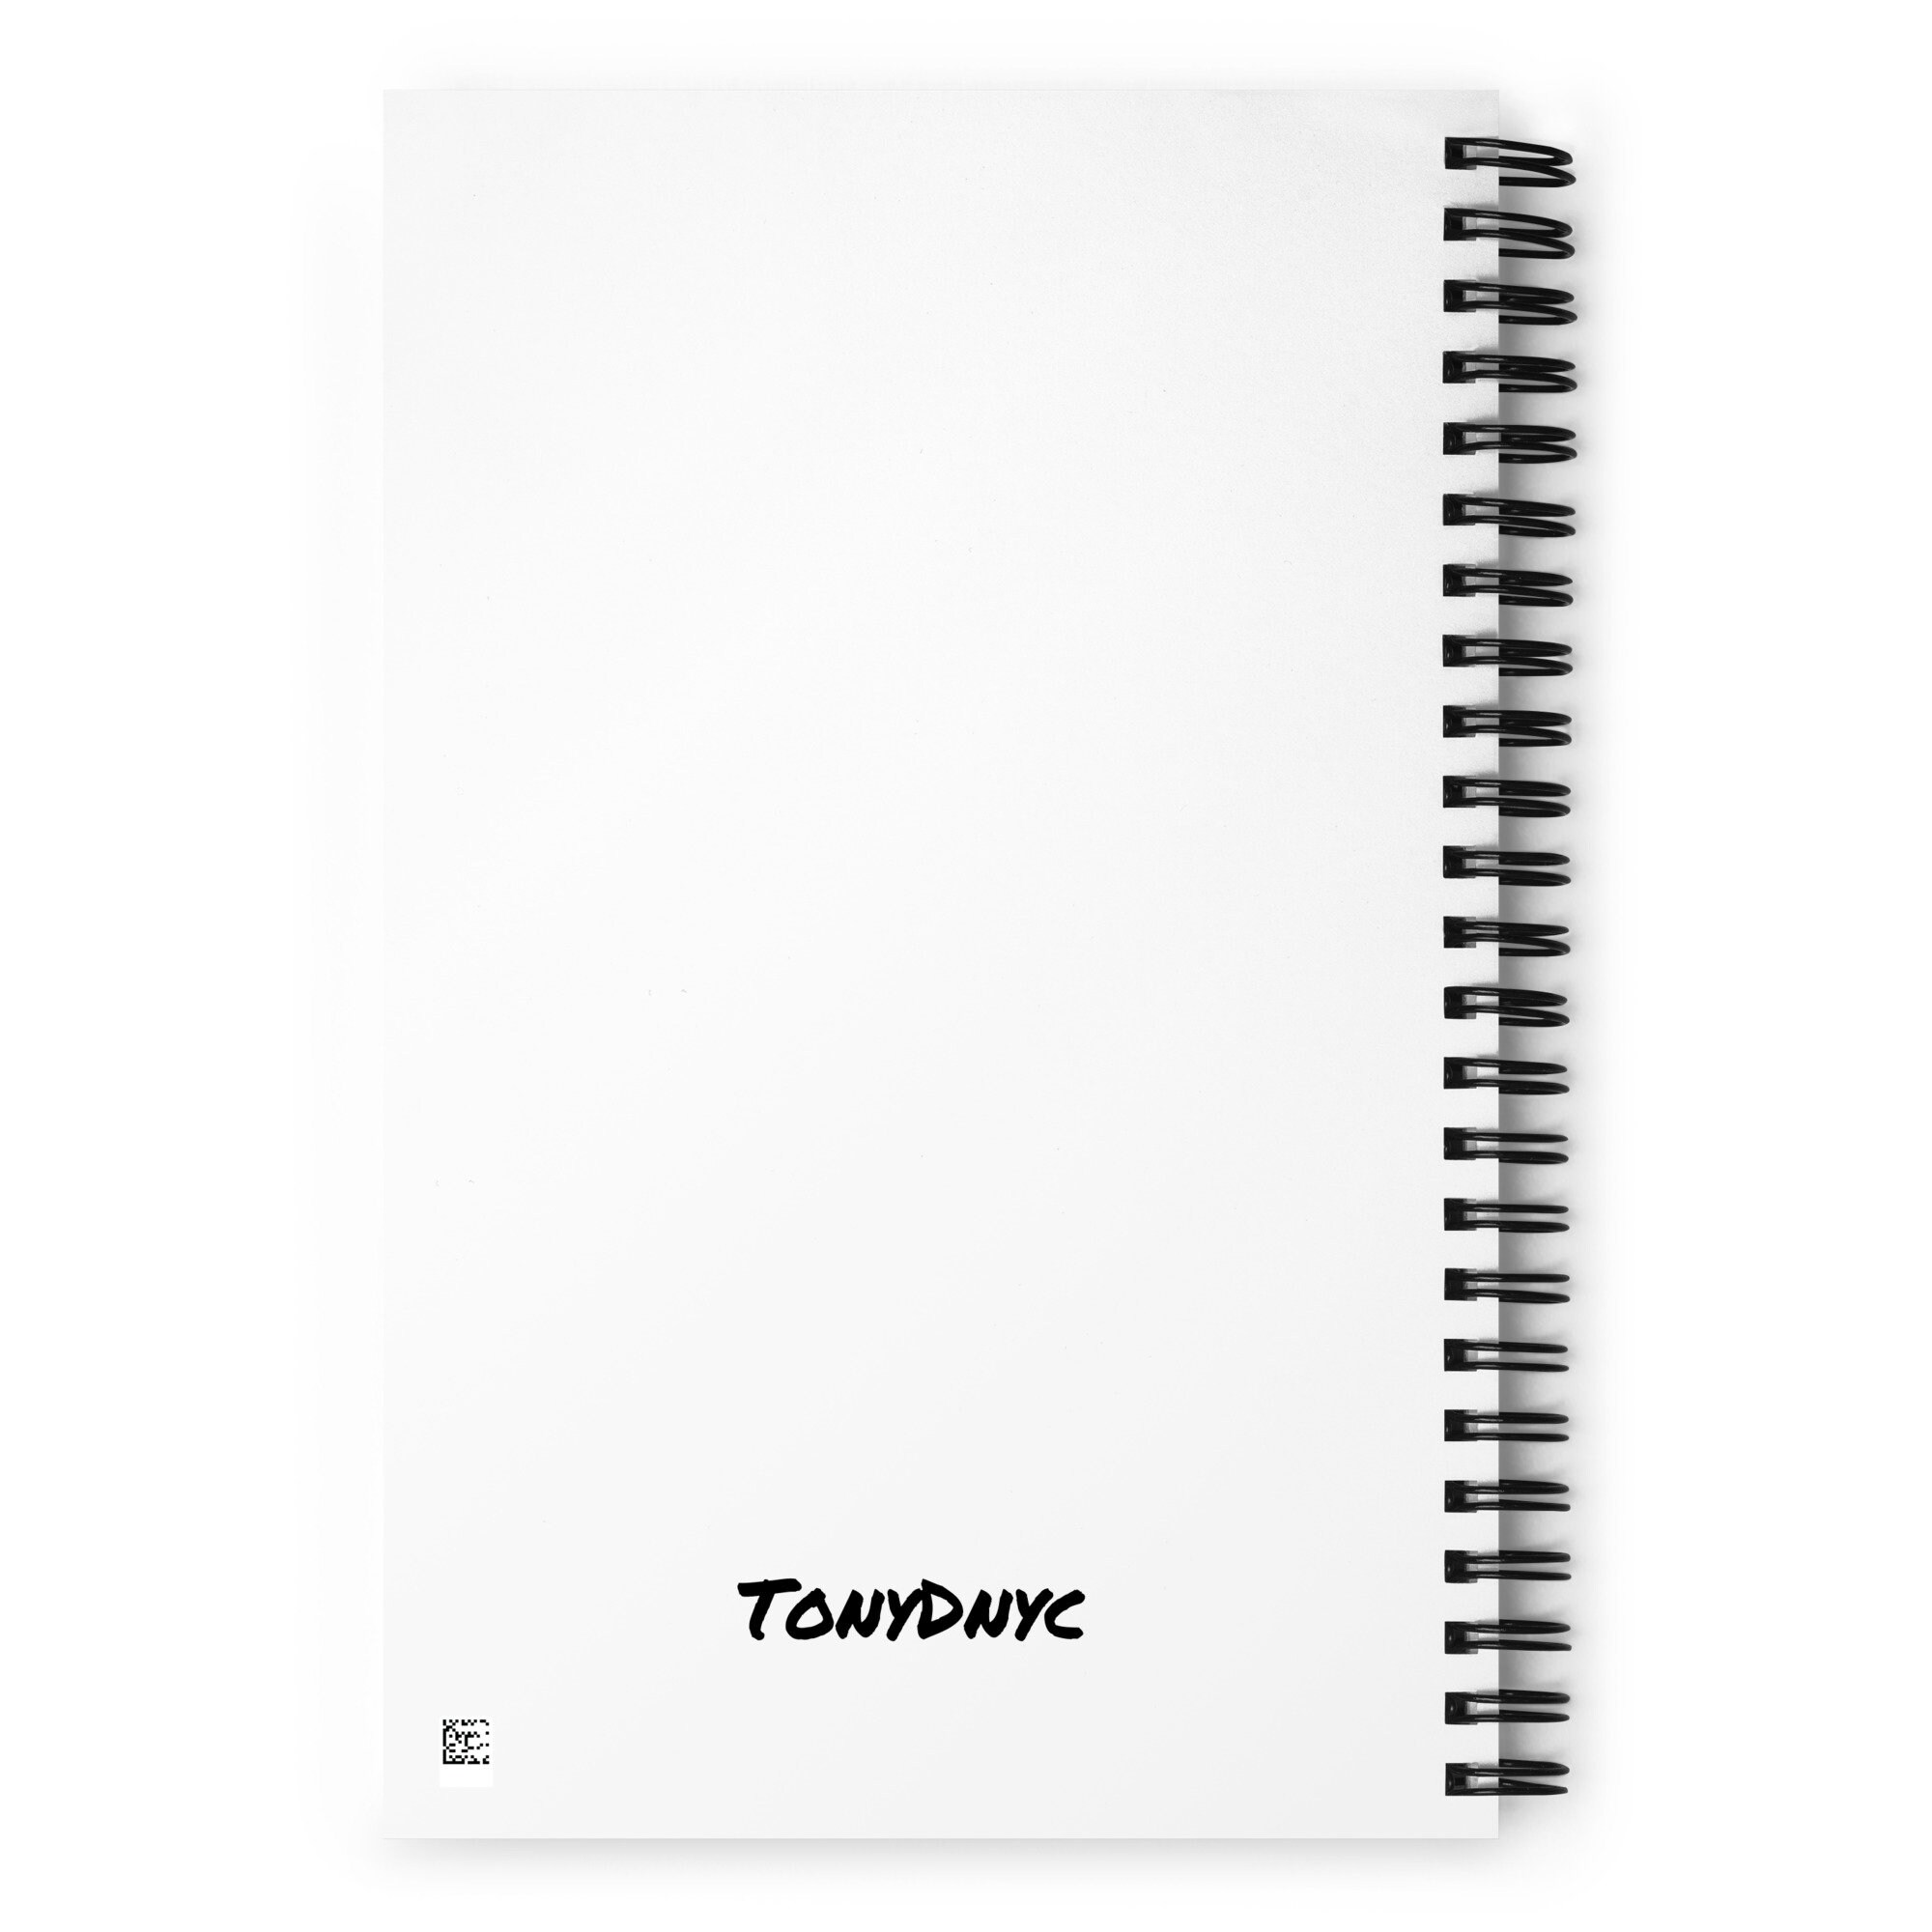 Blank Spiral Notebook, Sturdy High-quality Bullet Journal, Macro Graffiti  Photo Printed on Cover 